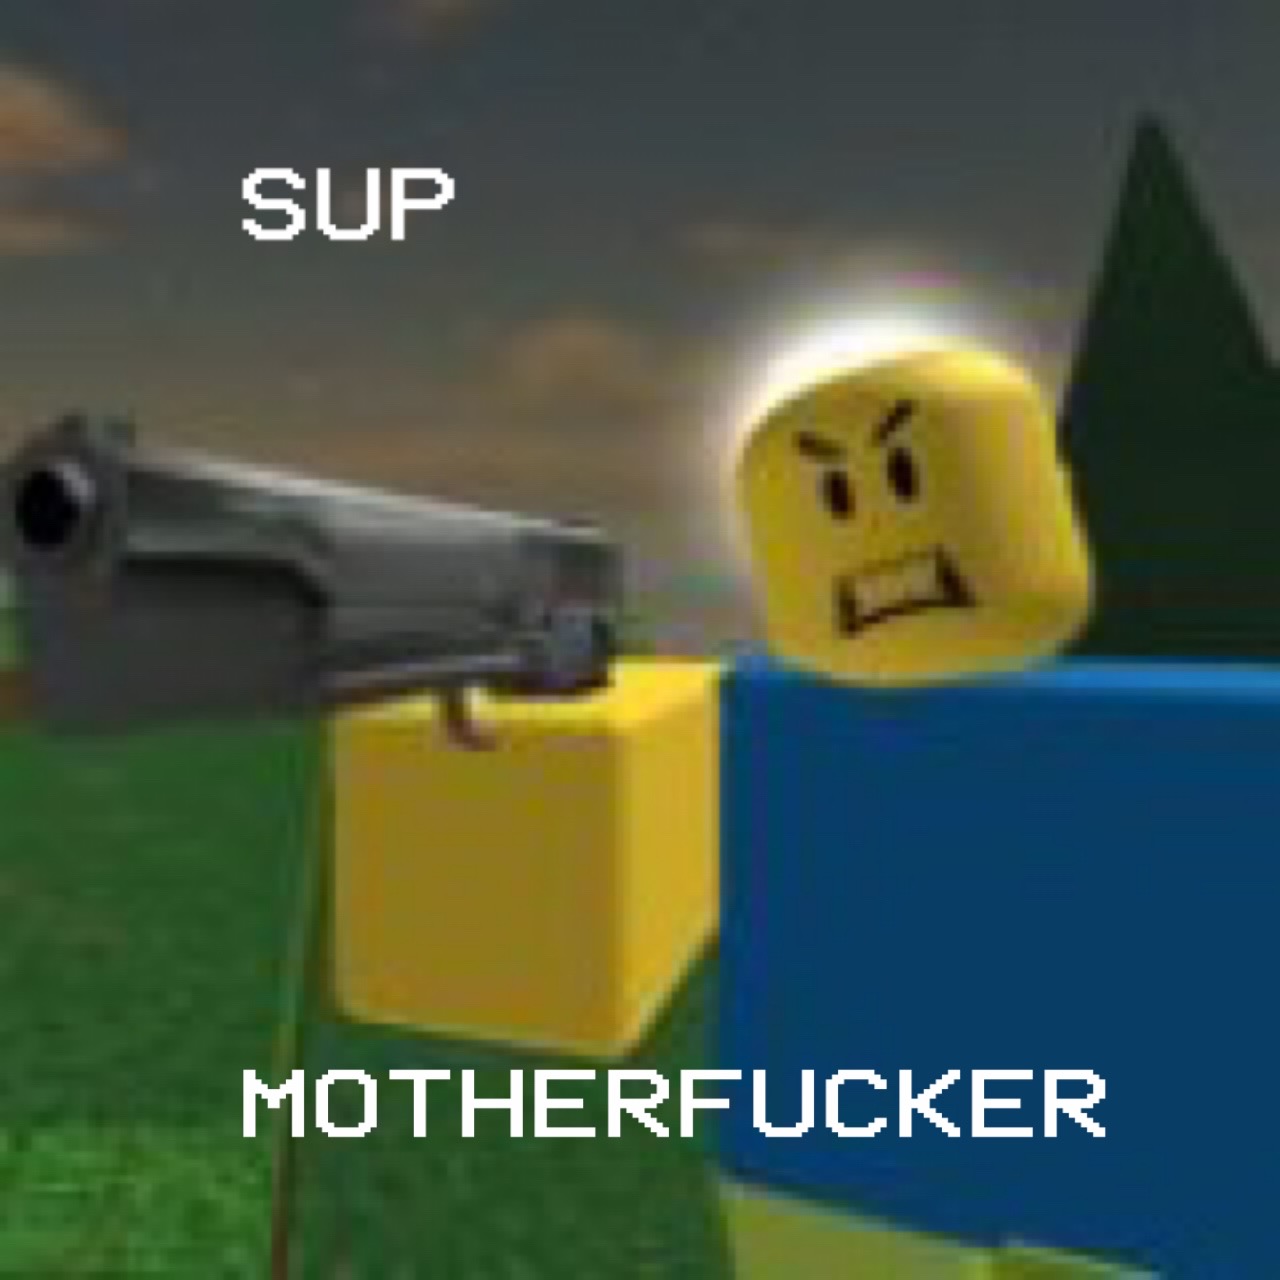 High Quality Noob with gun and swearing Blank Meme Template